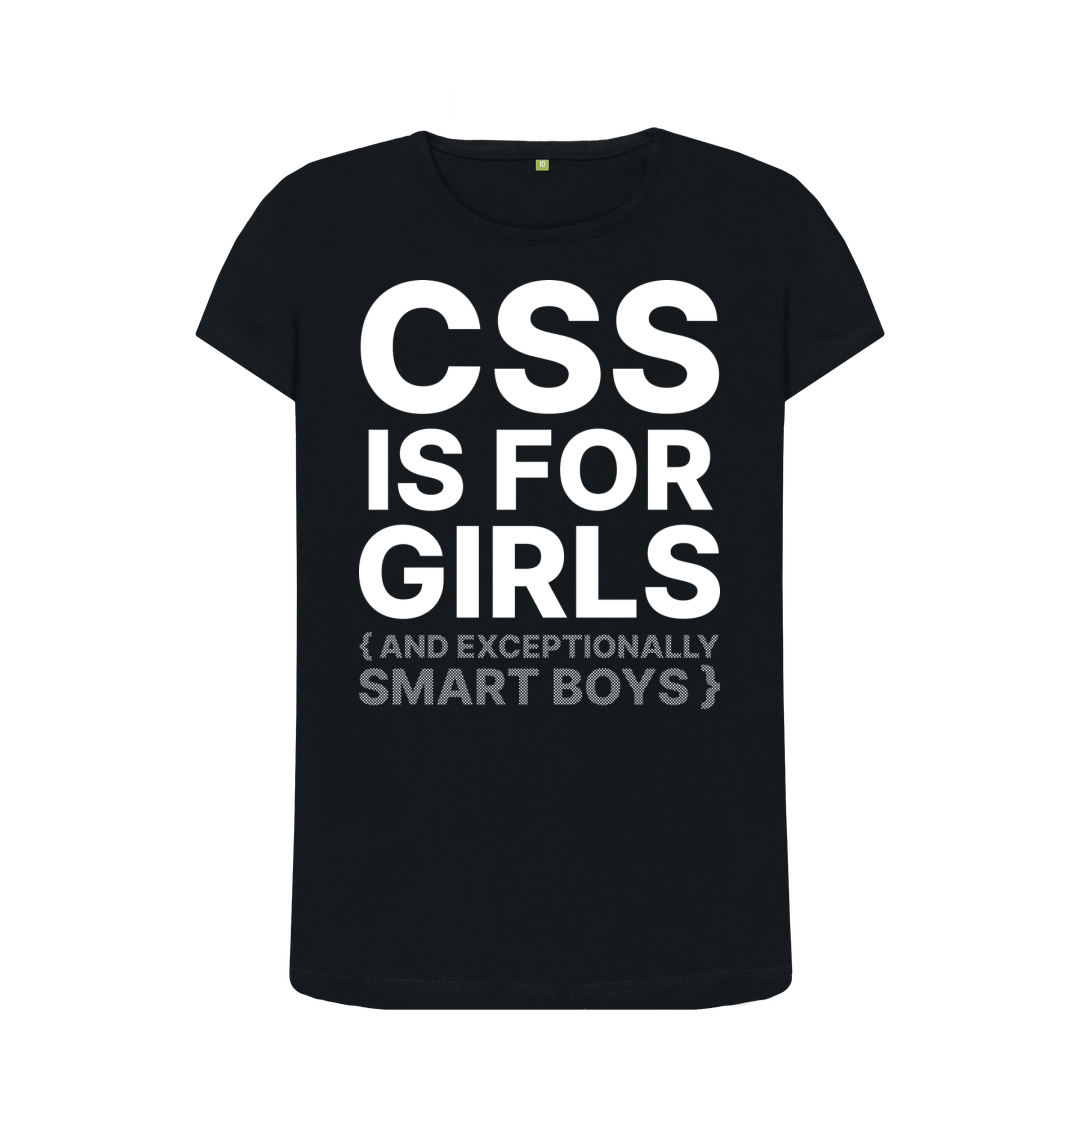 (CSS is for girls and exceptionally smart boys.)